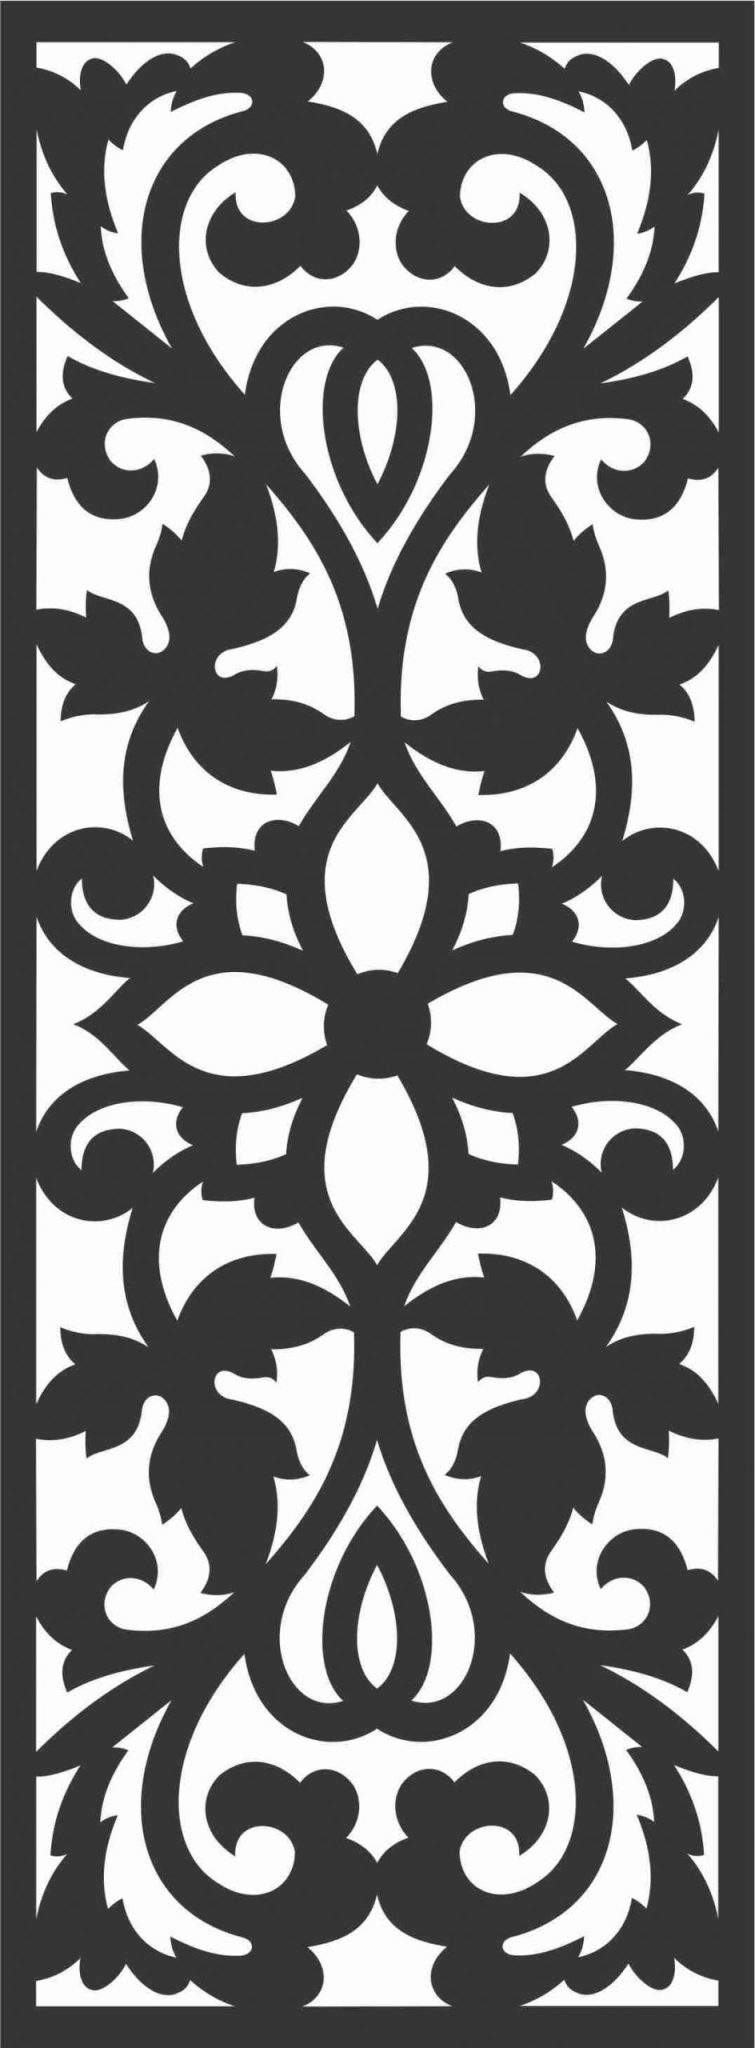 Floral Screen Patterns Design 77 Free DXF File